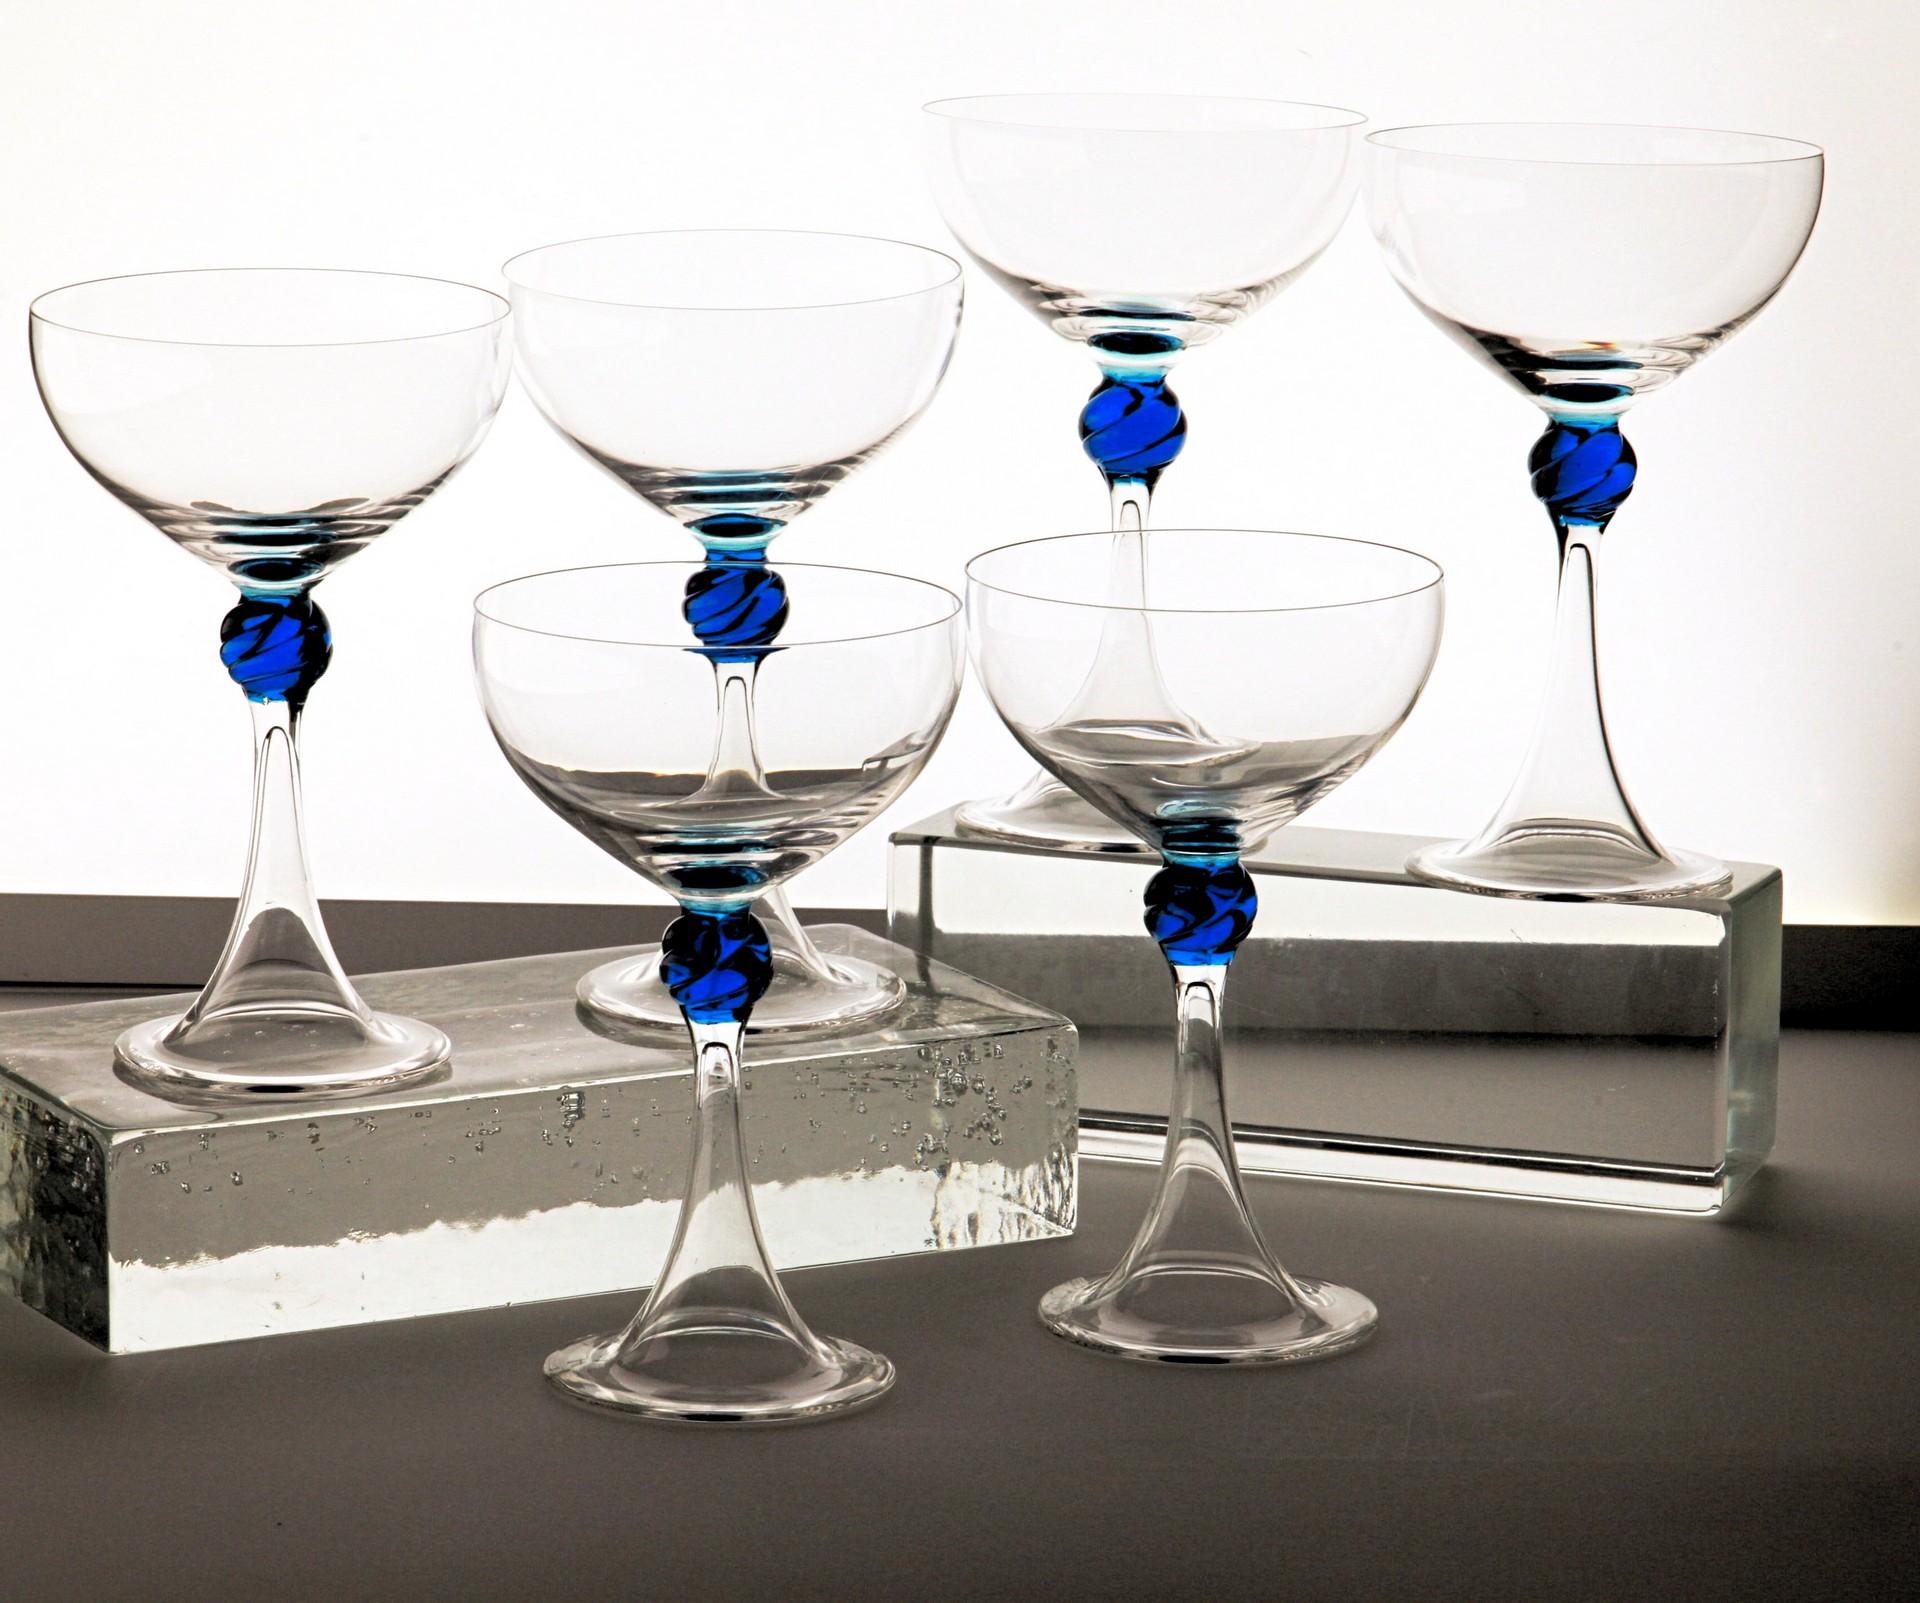 Art Glass Set of 6 Caravaggeschi Martini Champagne Murano Glass Cenedese Clear Cobalt